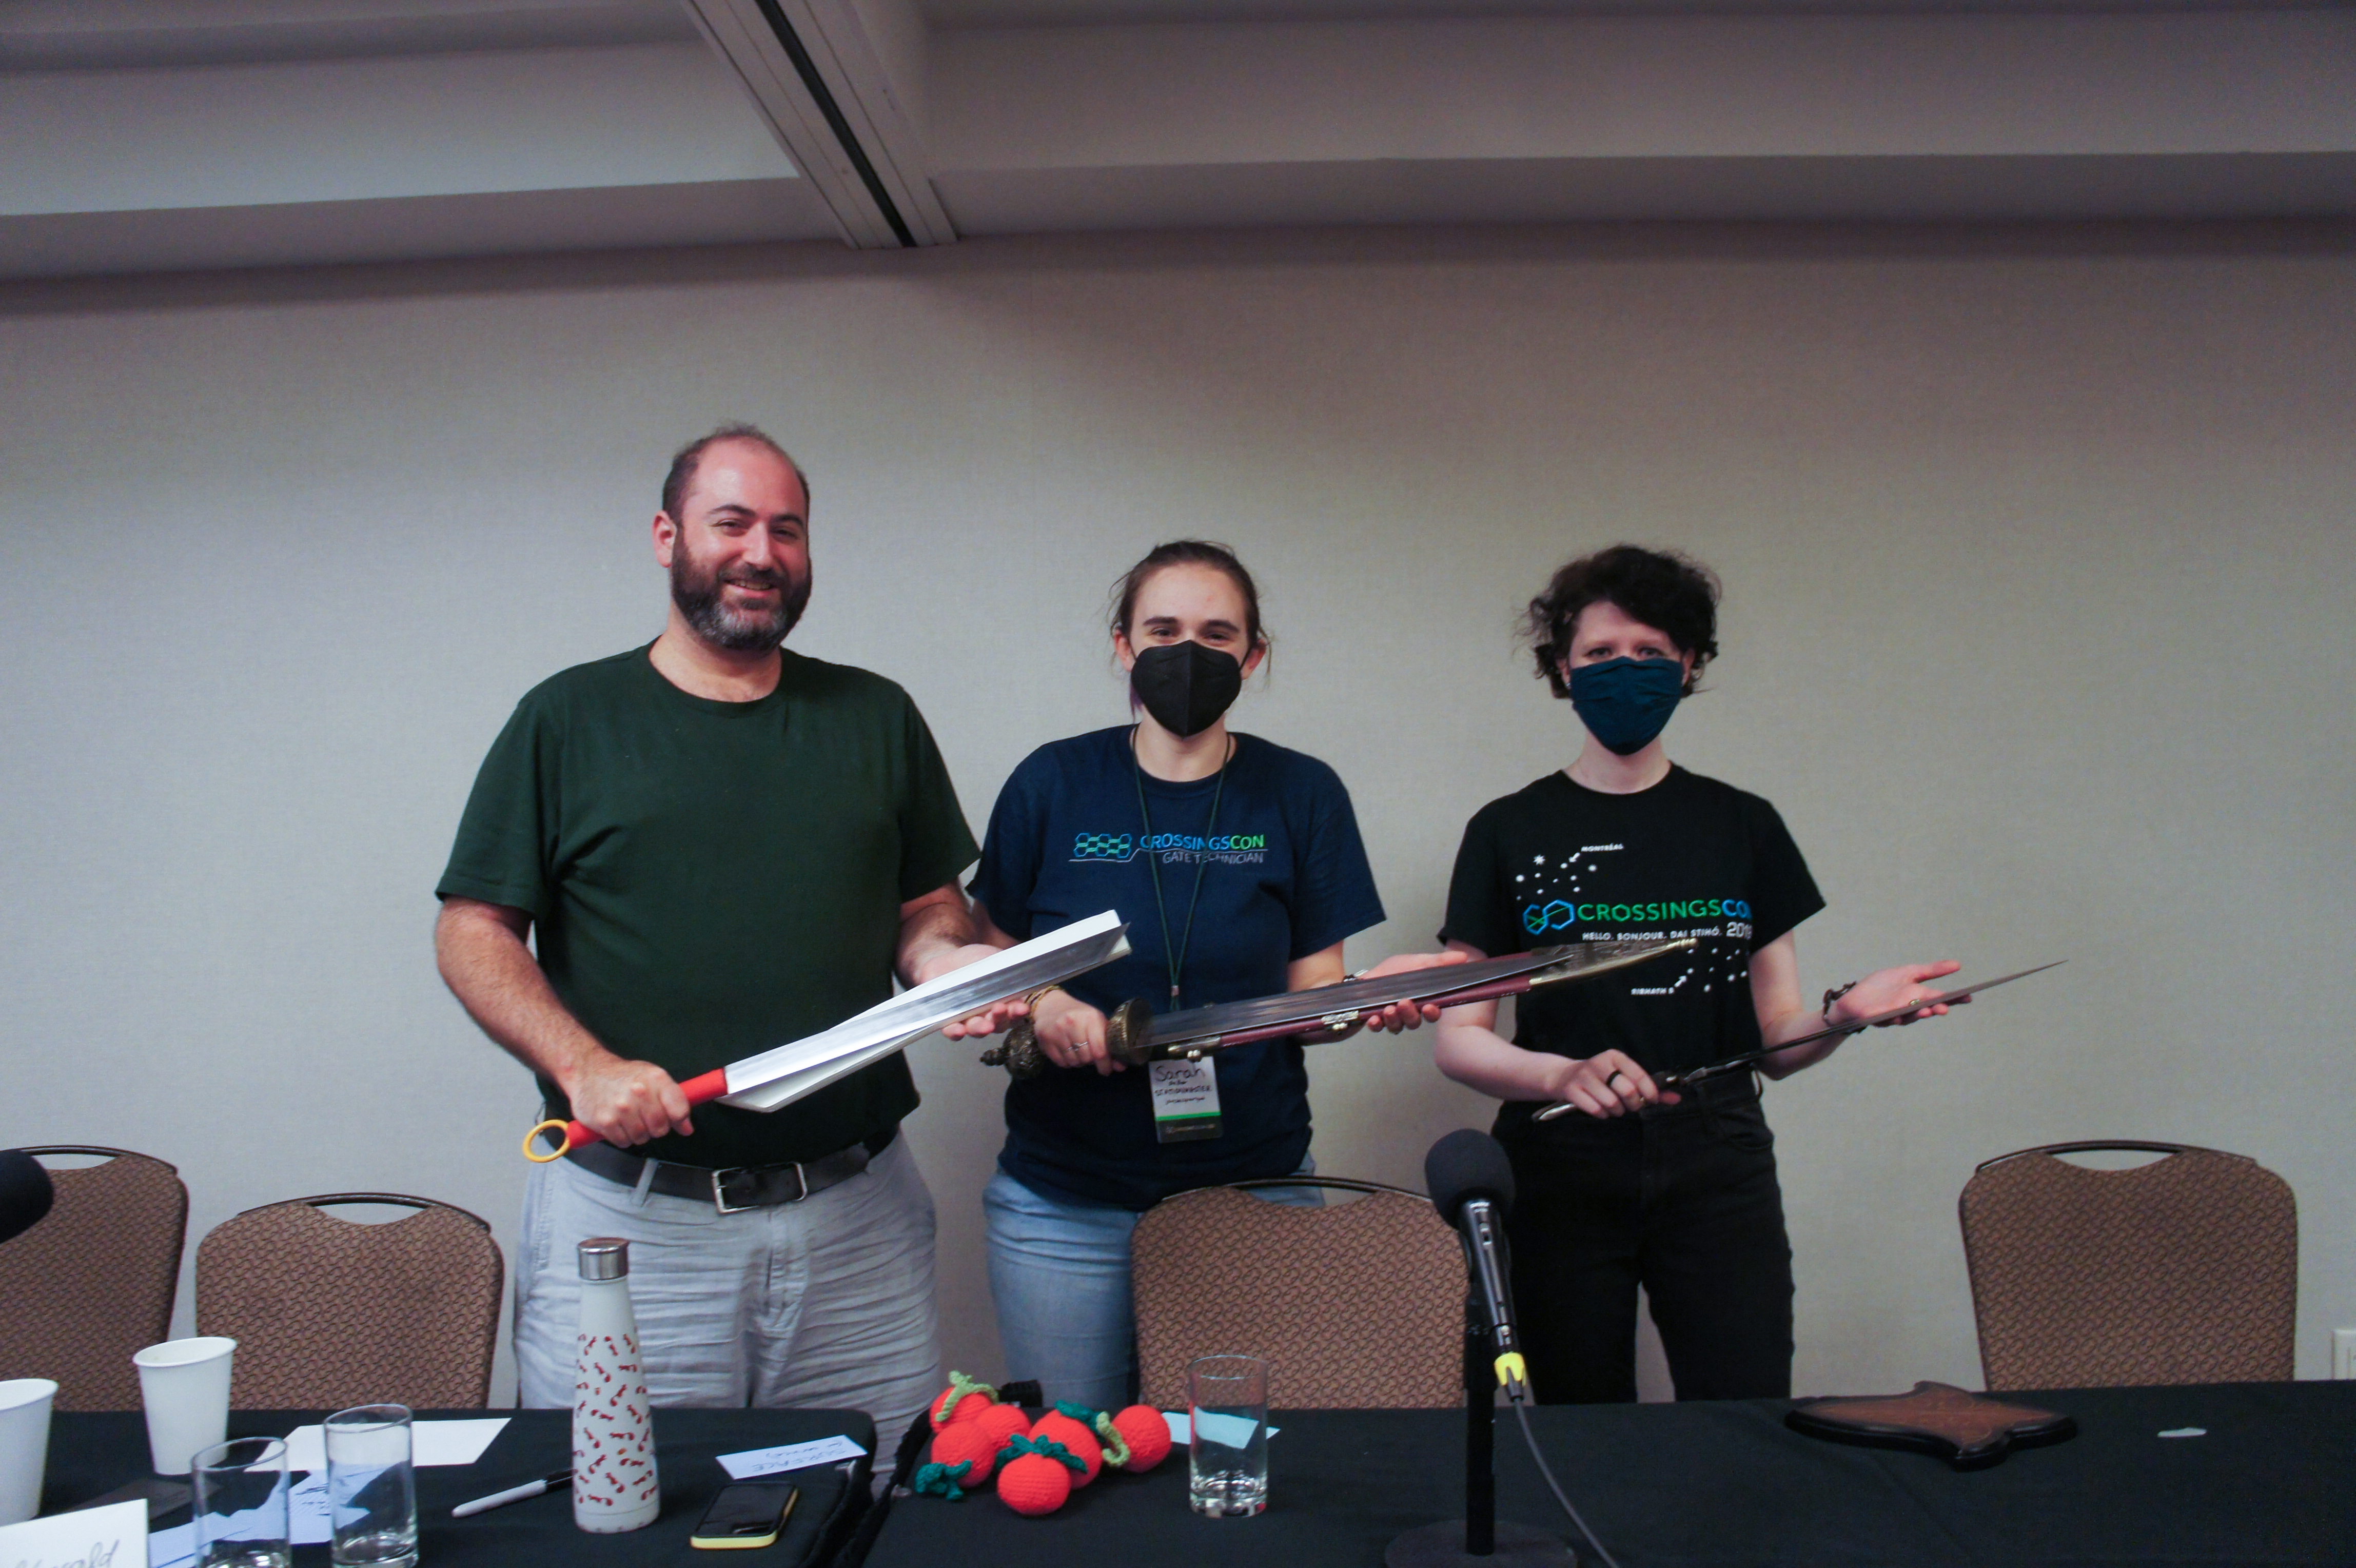 The Linguistics After Dark team with their new swords #GiveLinguistsSwords